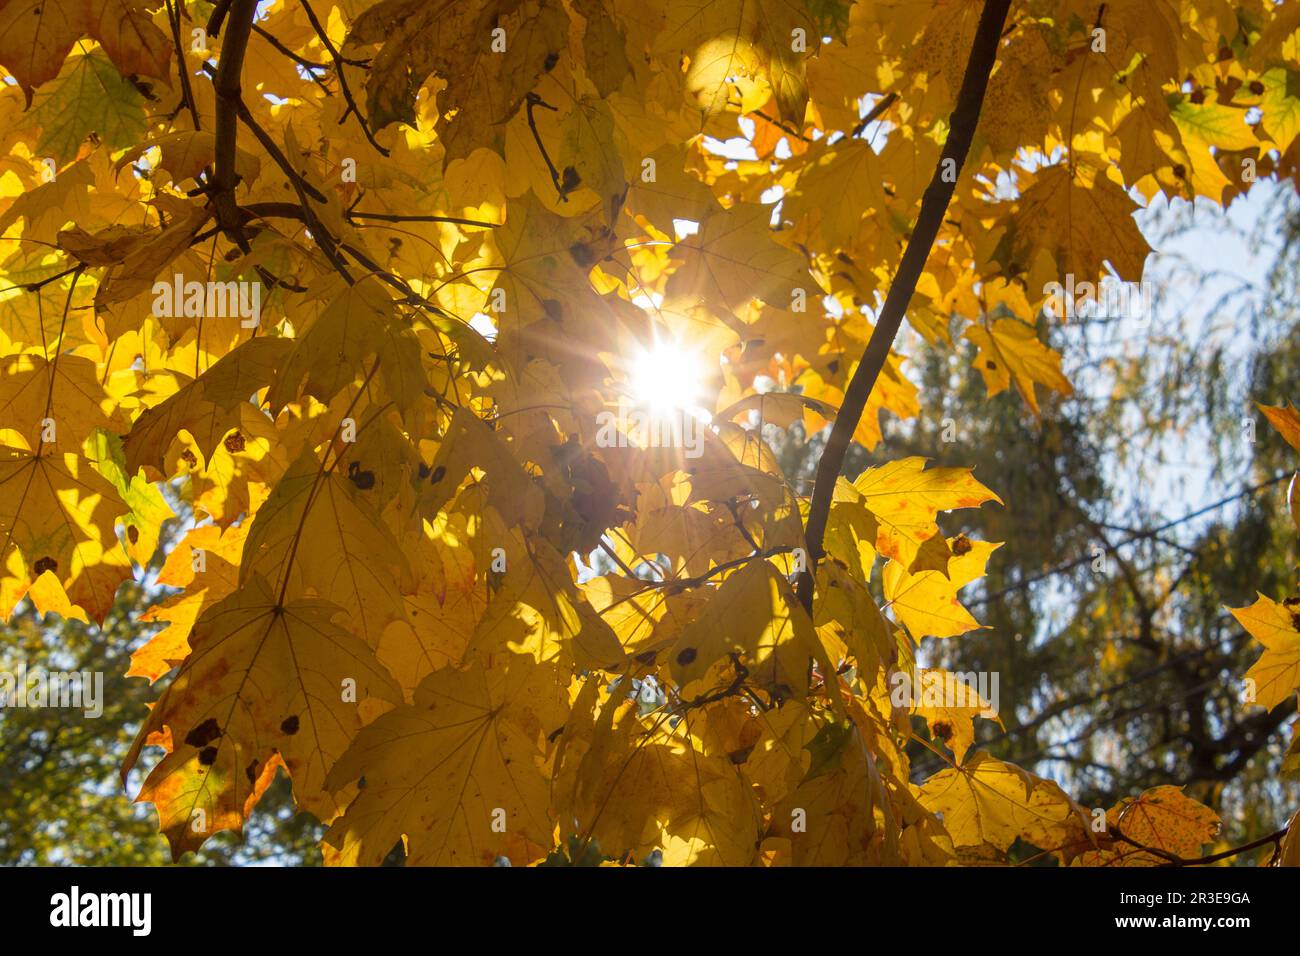 Fall Foliage Yellow Maple Leaves Falling From Tree in Autumn and morning sunlight Stock Photo